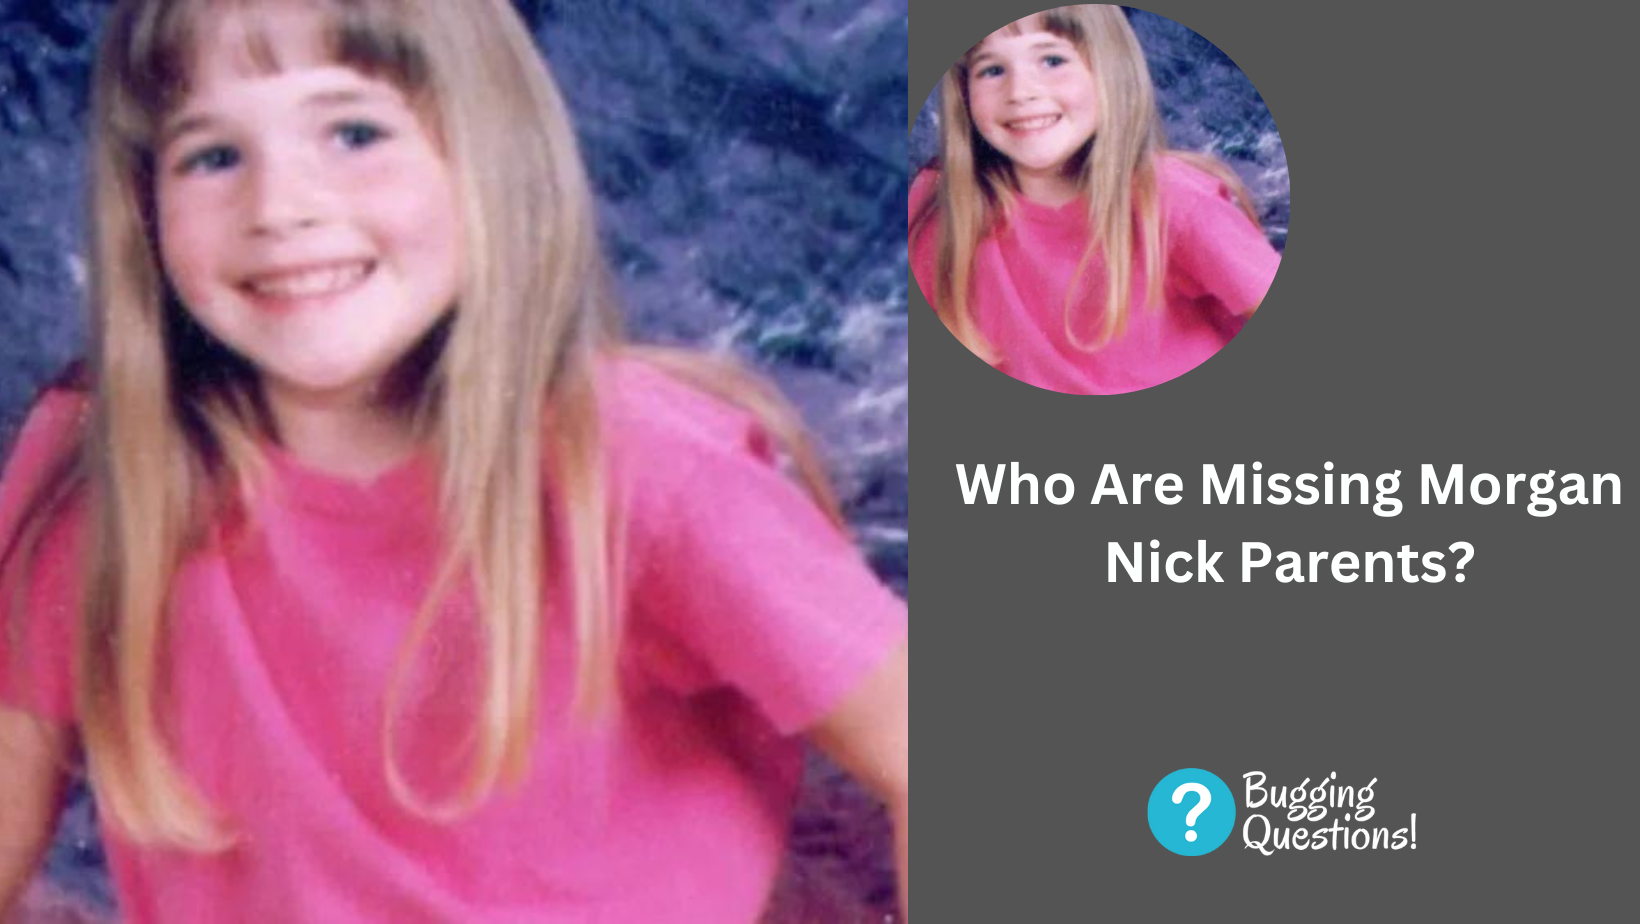 Who Are Missing Morgan Nick Parents?